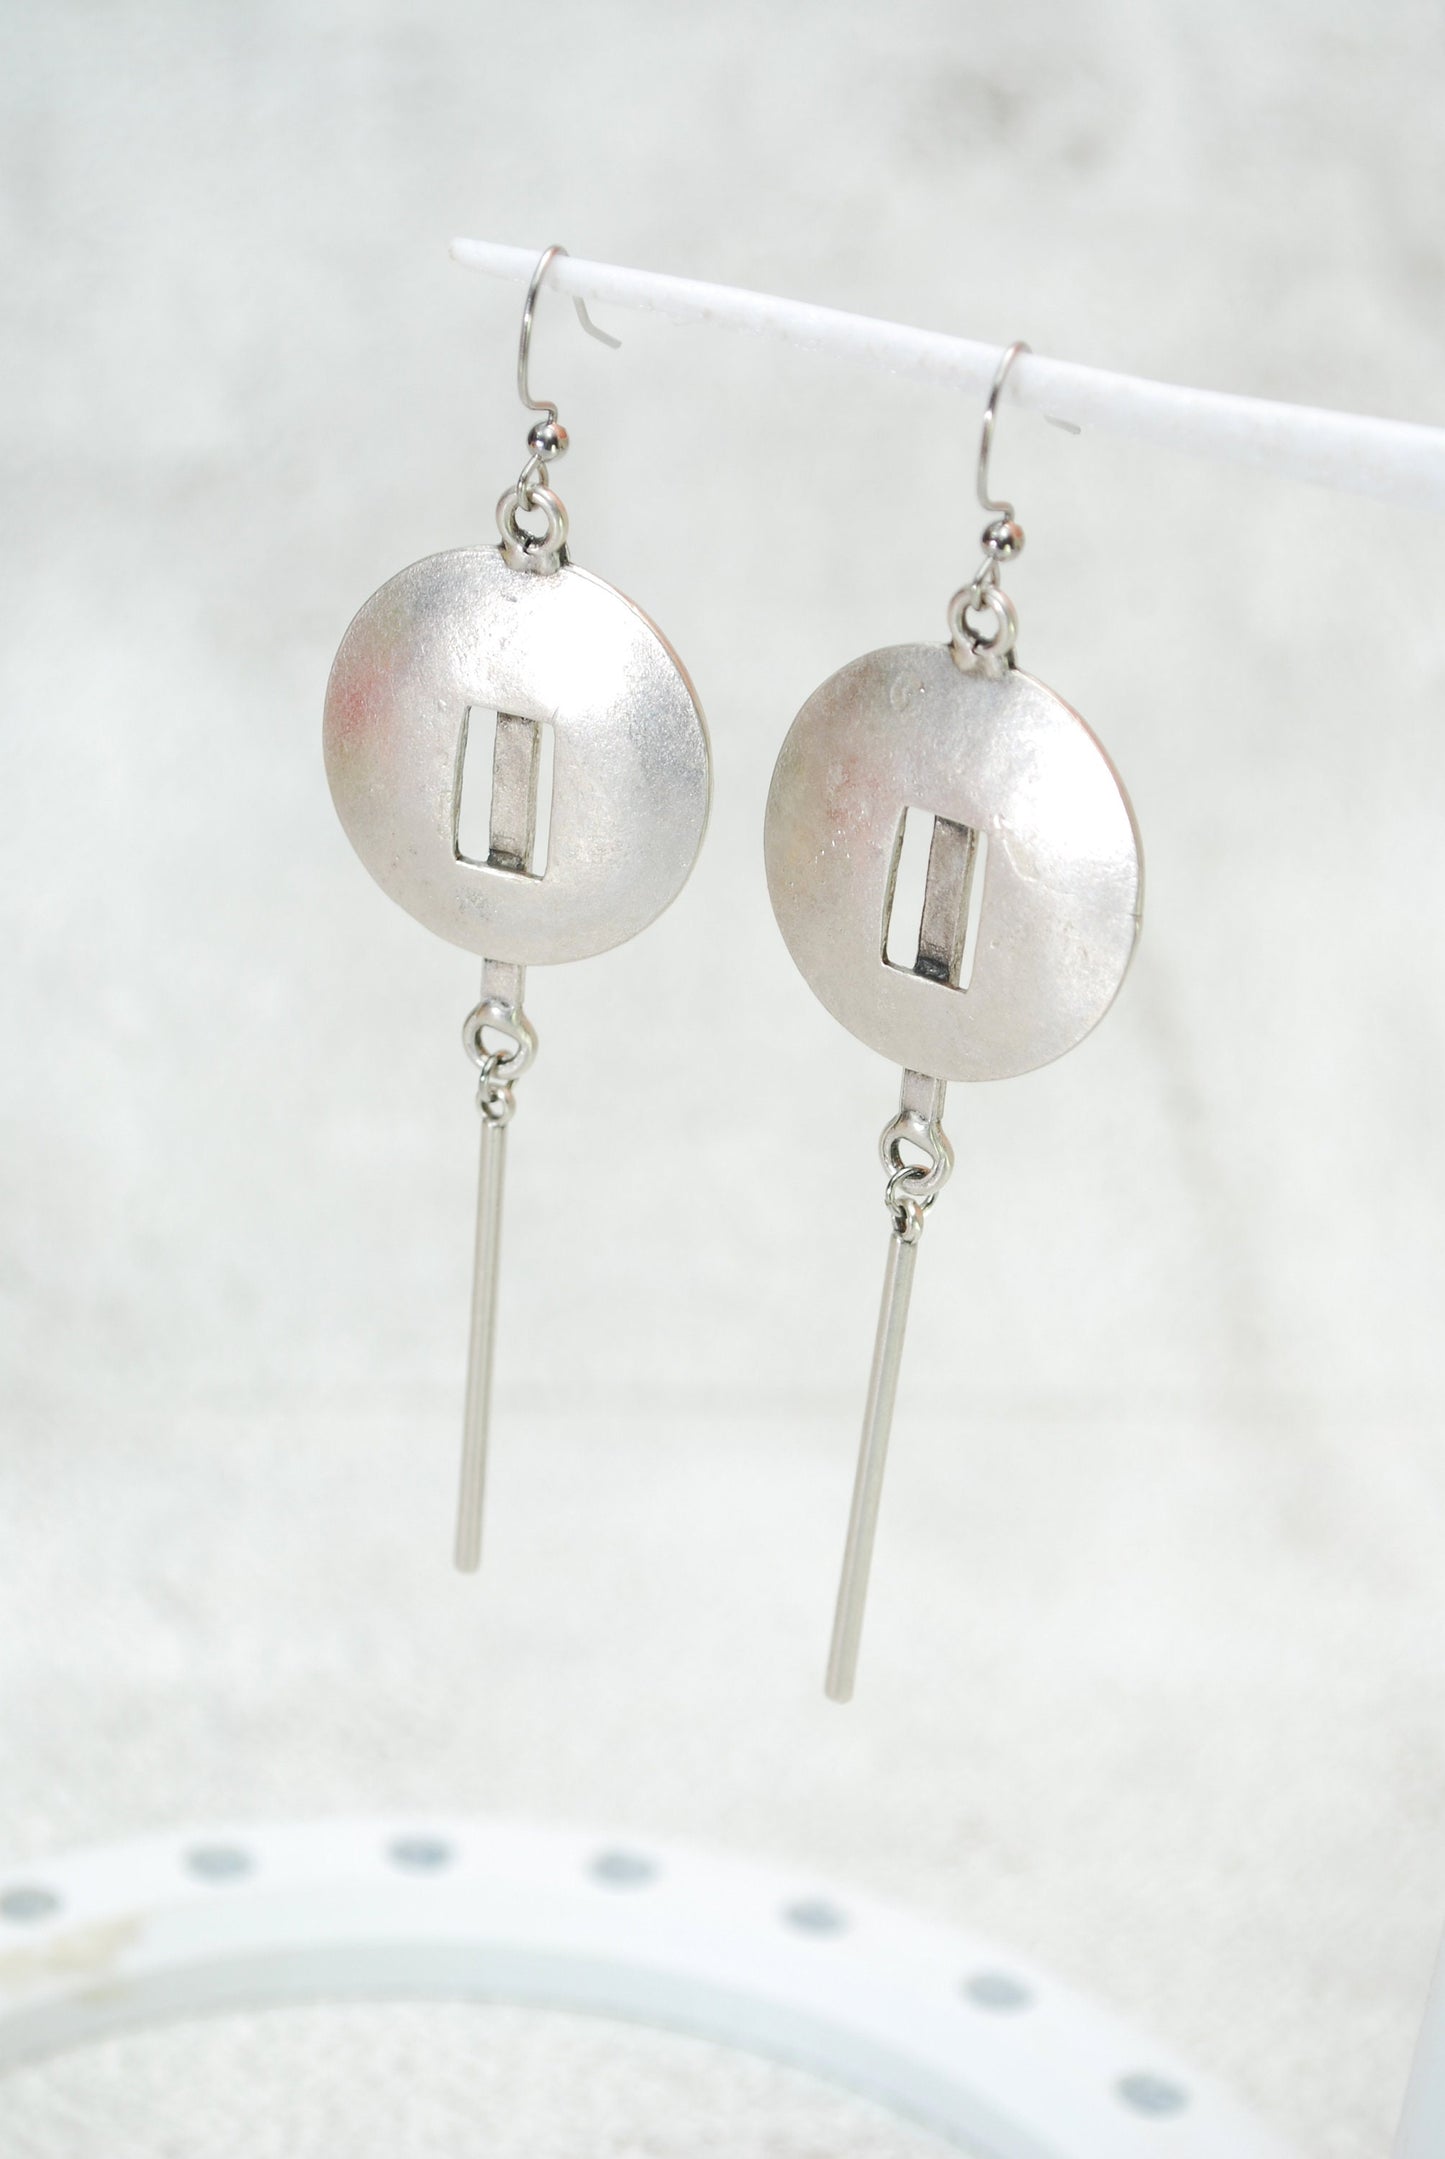 Artisanal Elegance: Limited Edition Antique Silver Abstract Long Earrings, 10cm - 4"